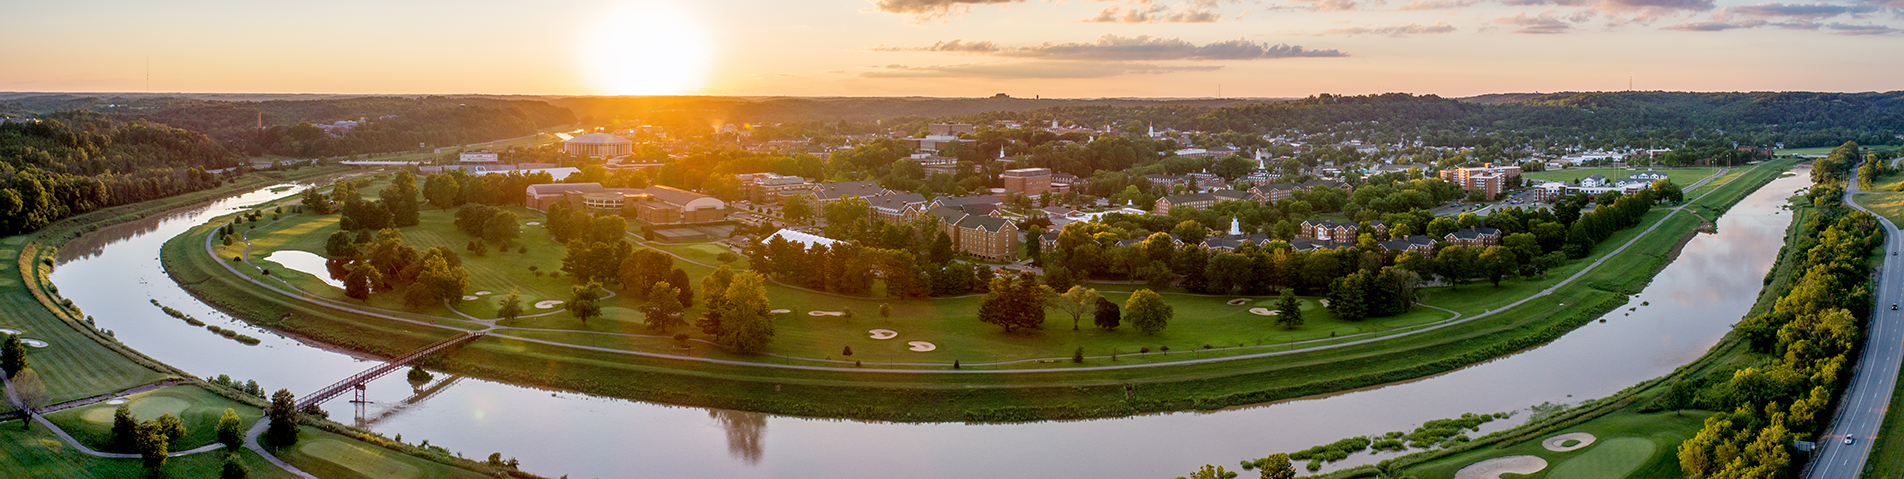 campus at sunset areal view